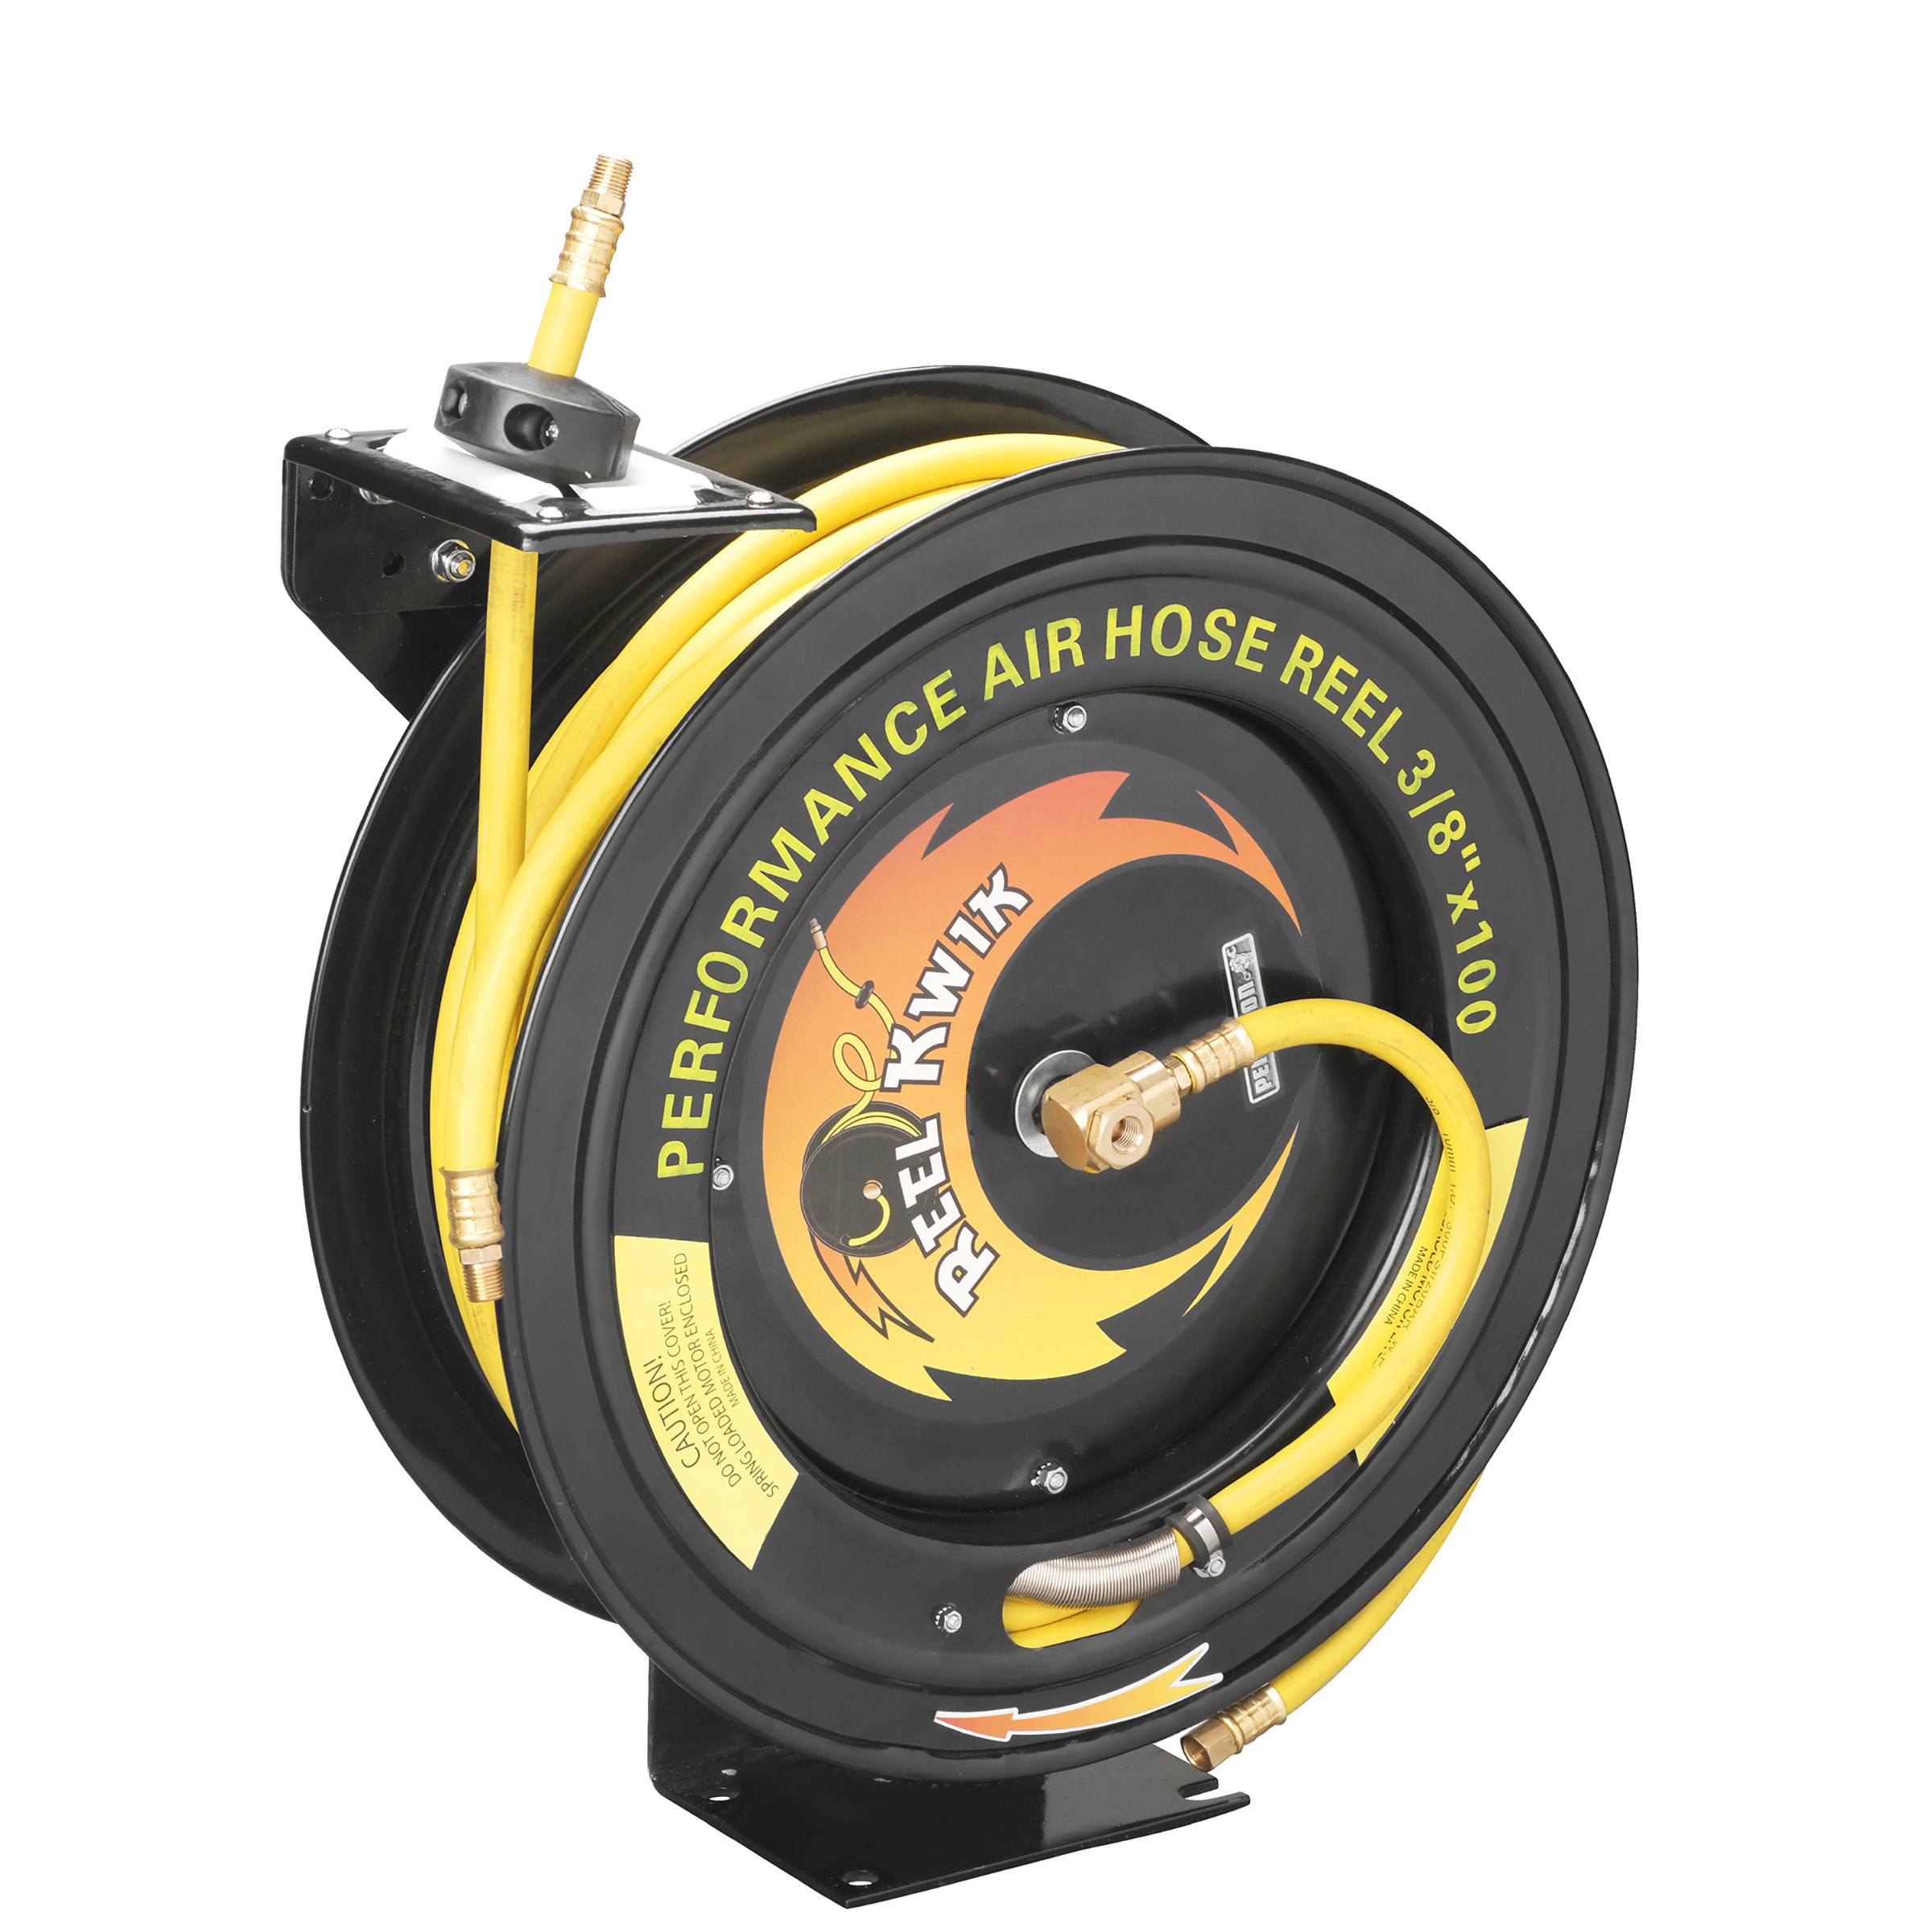 100 ft water hose in Air Hose Reel Online Shopping